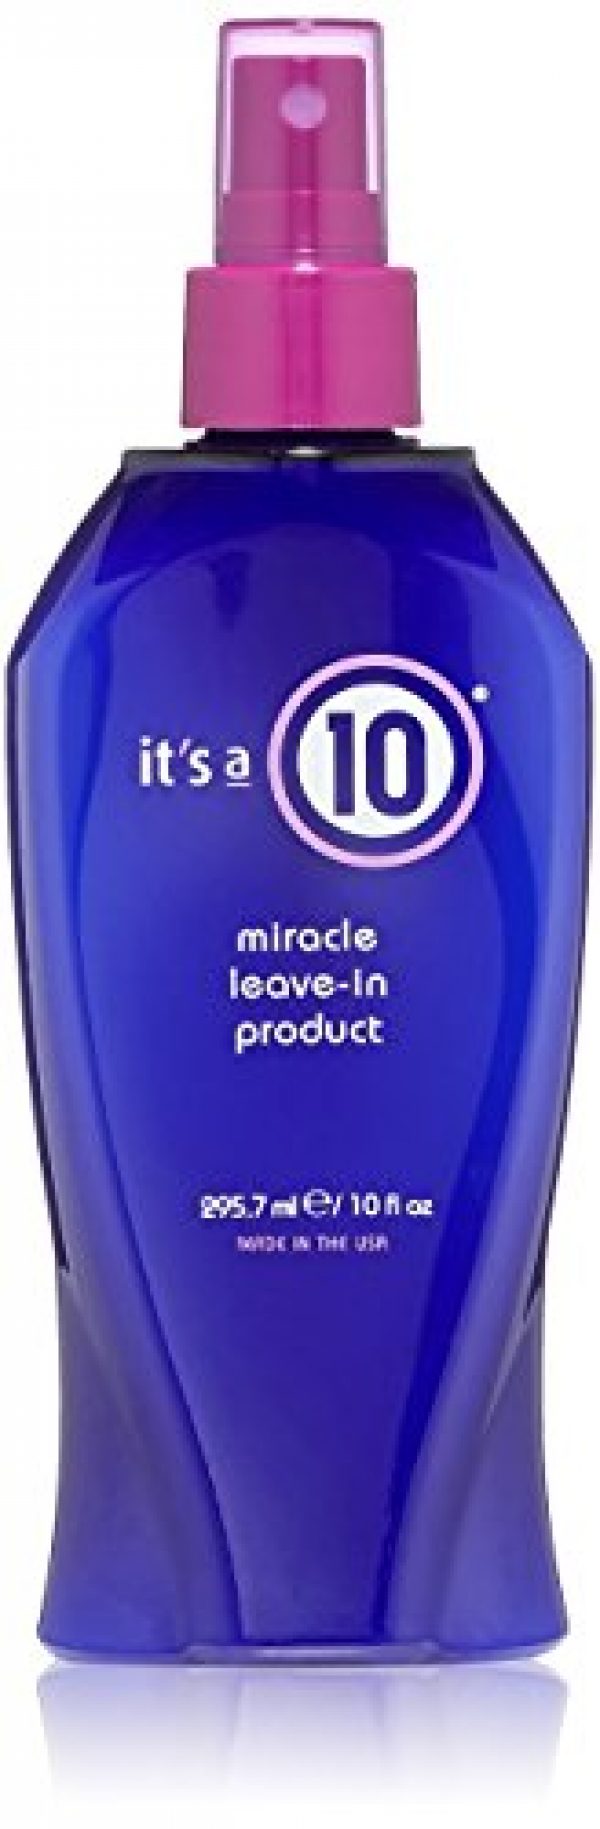 It's A 10 Haircare Miracle Leave-In Conditioner Spray - 10 oz. - 1ct 4